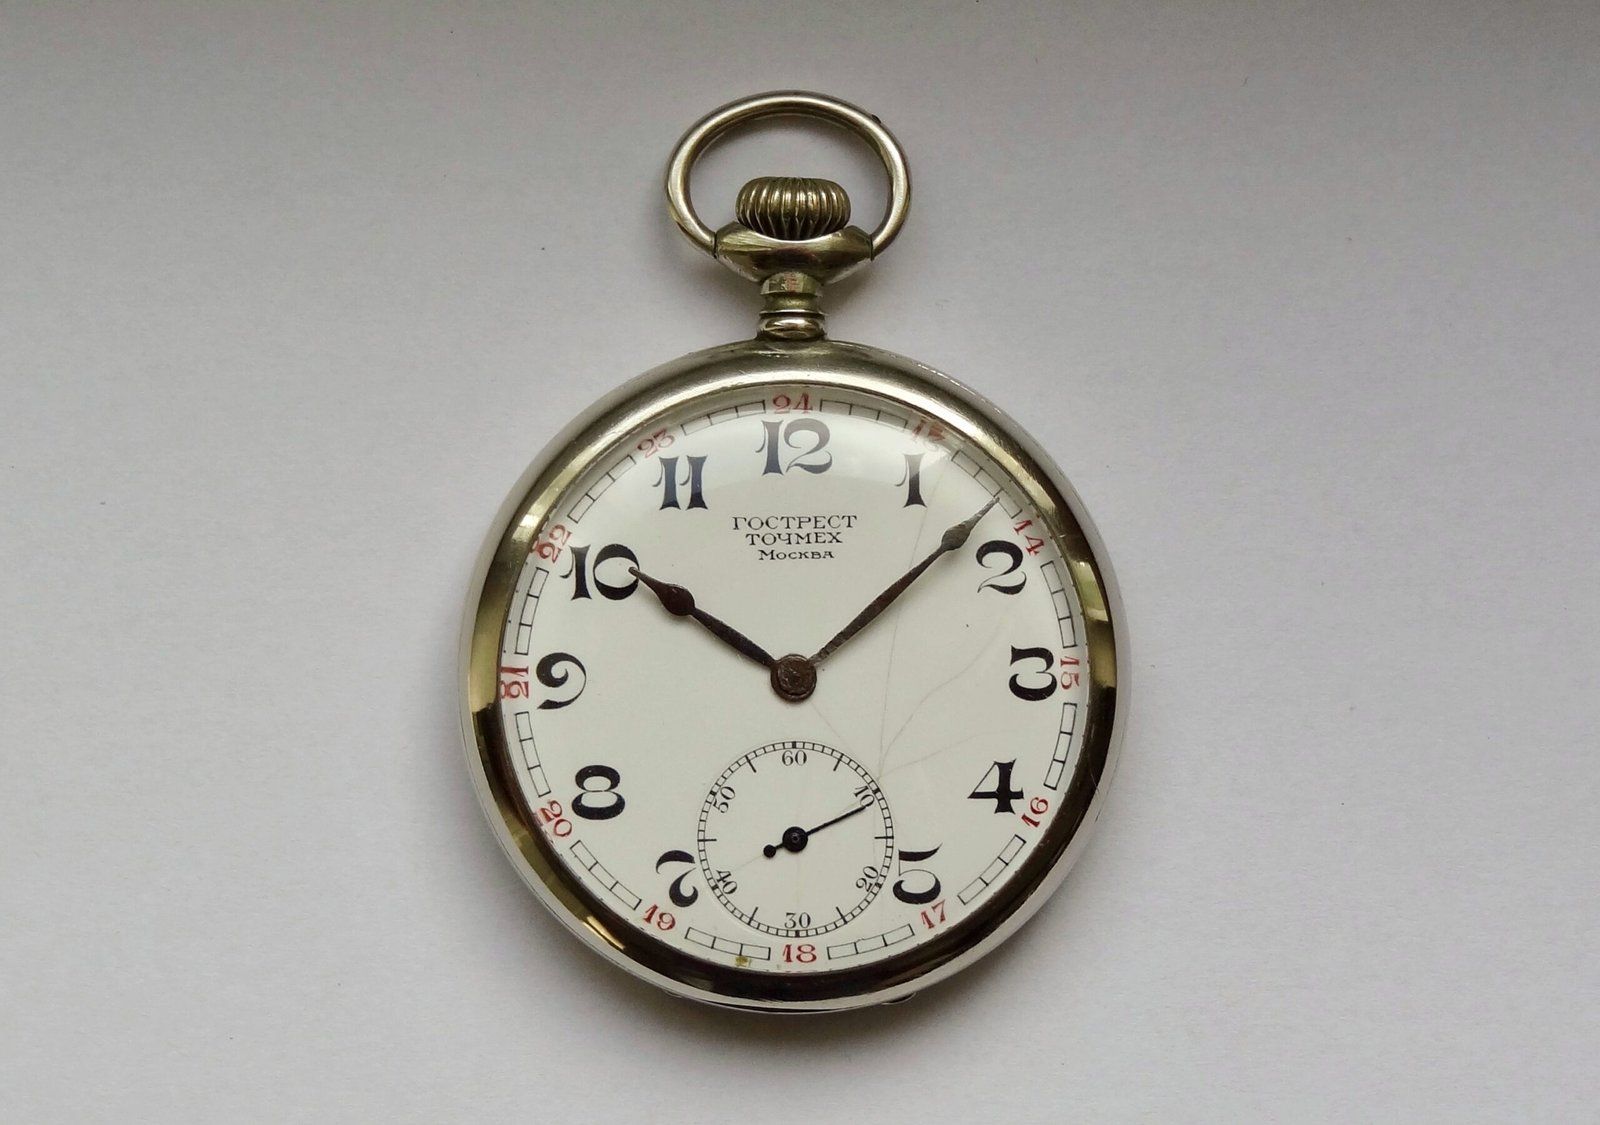 Gostrest Tochmekh pocket watches were made from salvaged/imported swiss watch parts mixed with domestically produced parts. (Courtesy: Dashiell Stanford; https://mroatman.wixsite.com/watches-of-the-ussr)